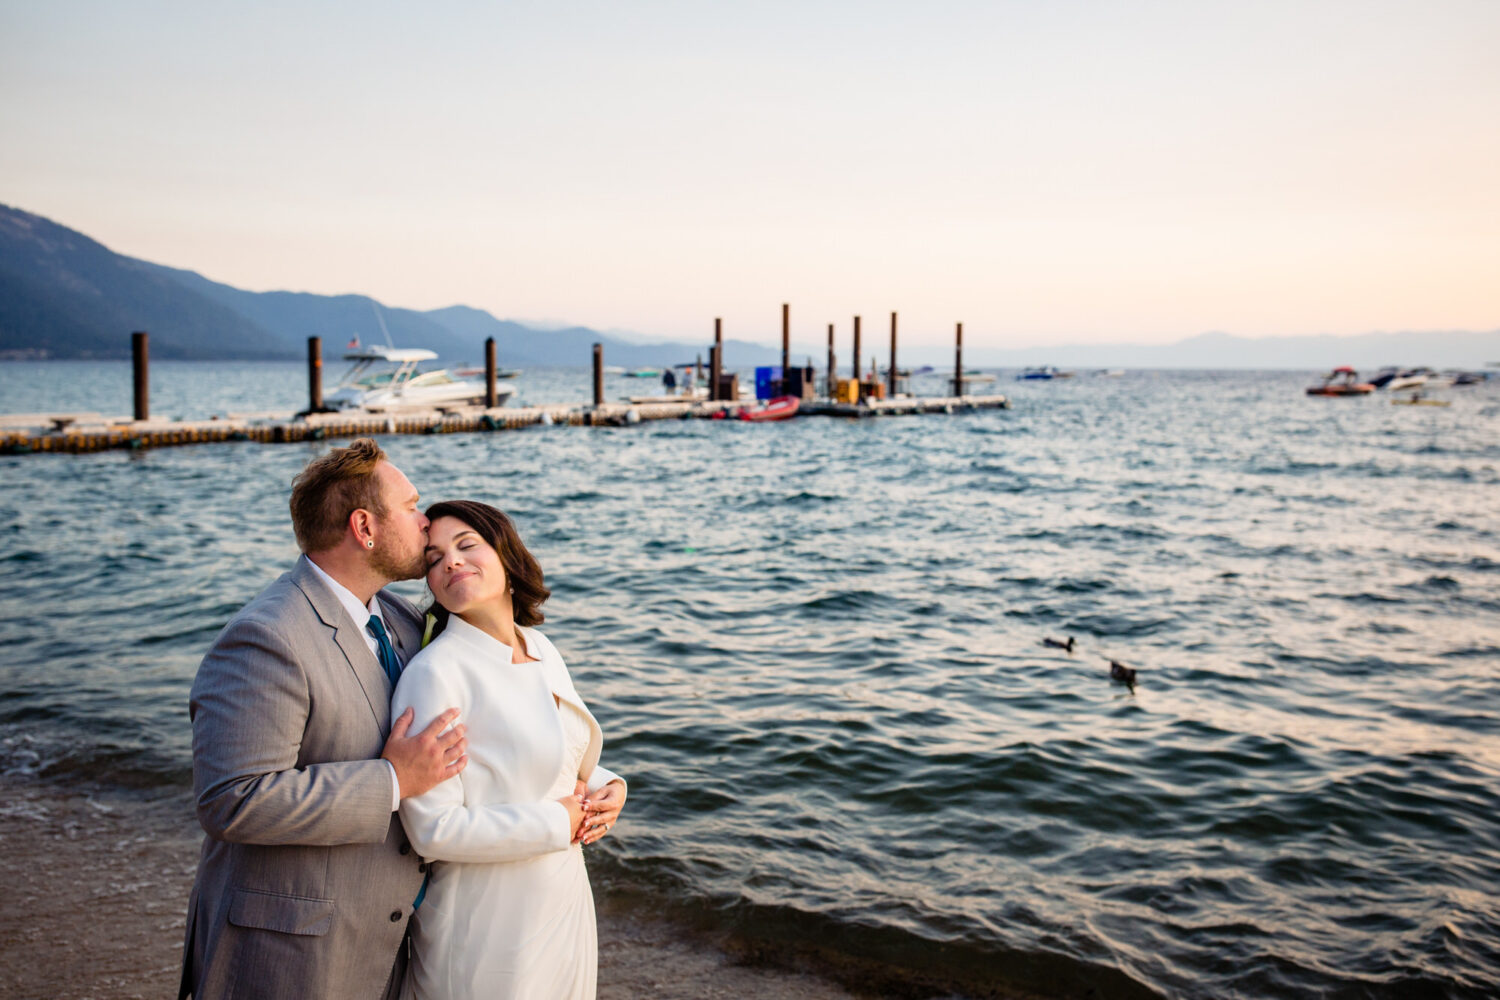 A lakeside kiss at sunset for a couple who decided to get married at the Hyatt Regency Lake Tahoe Resort.